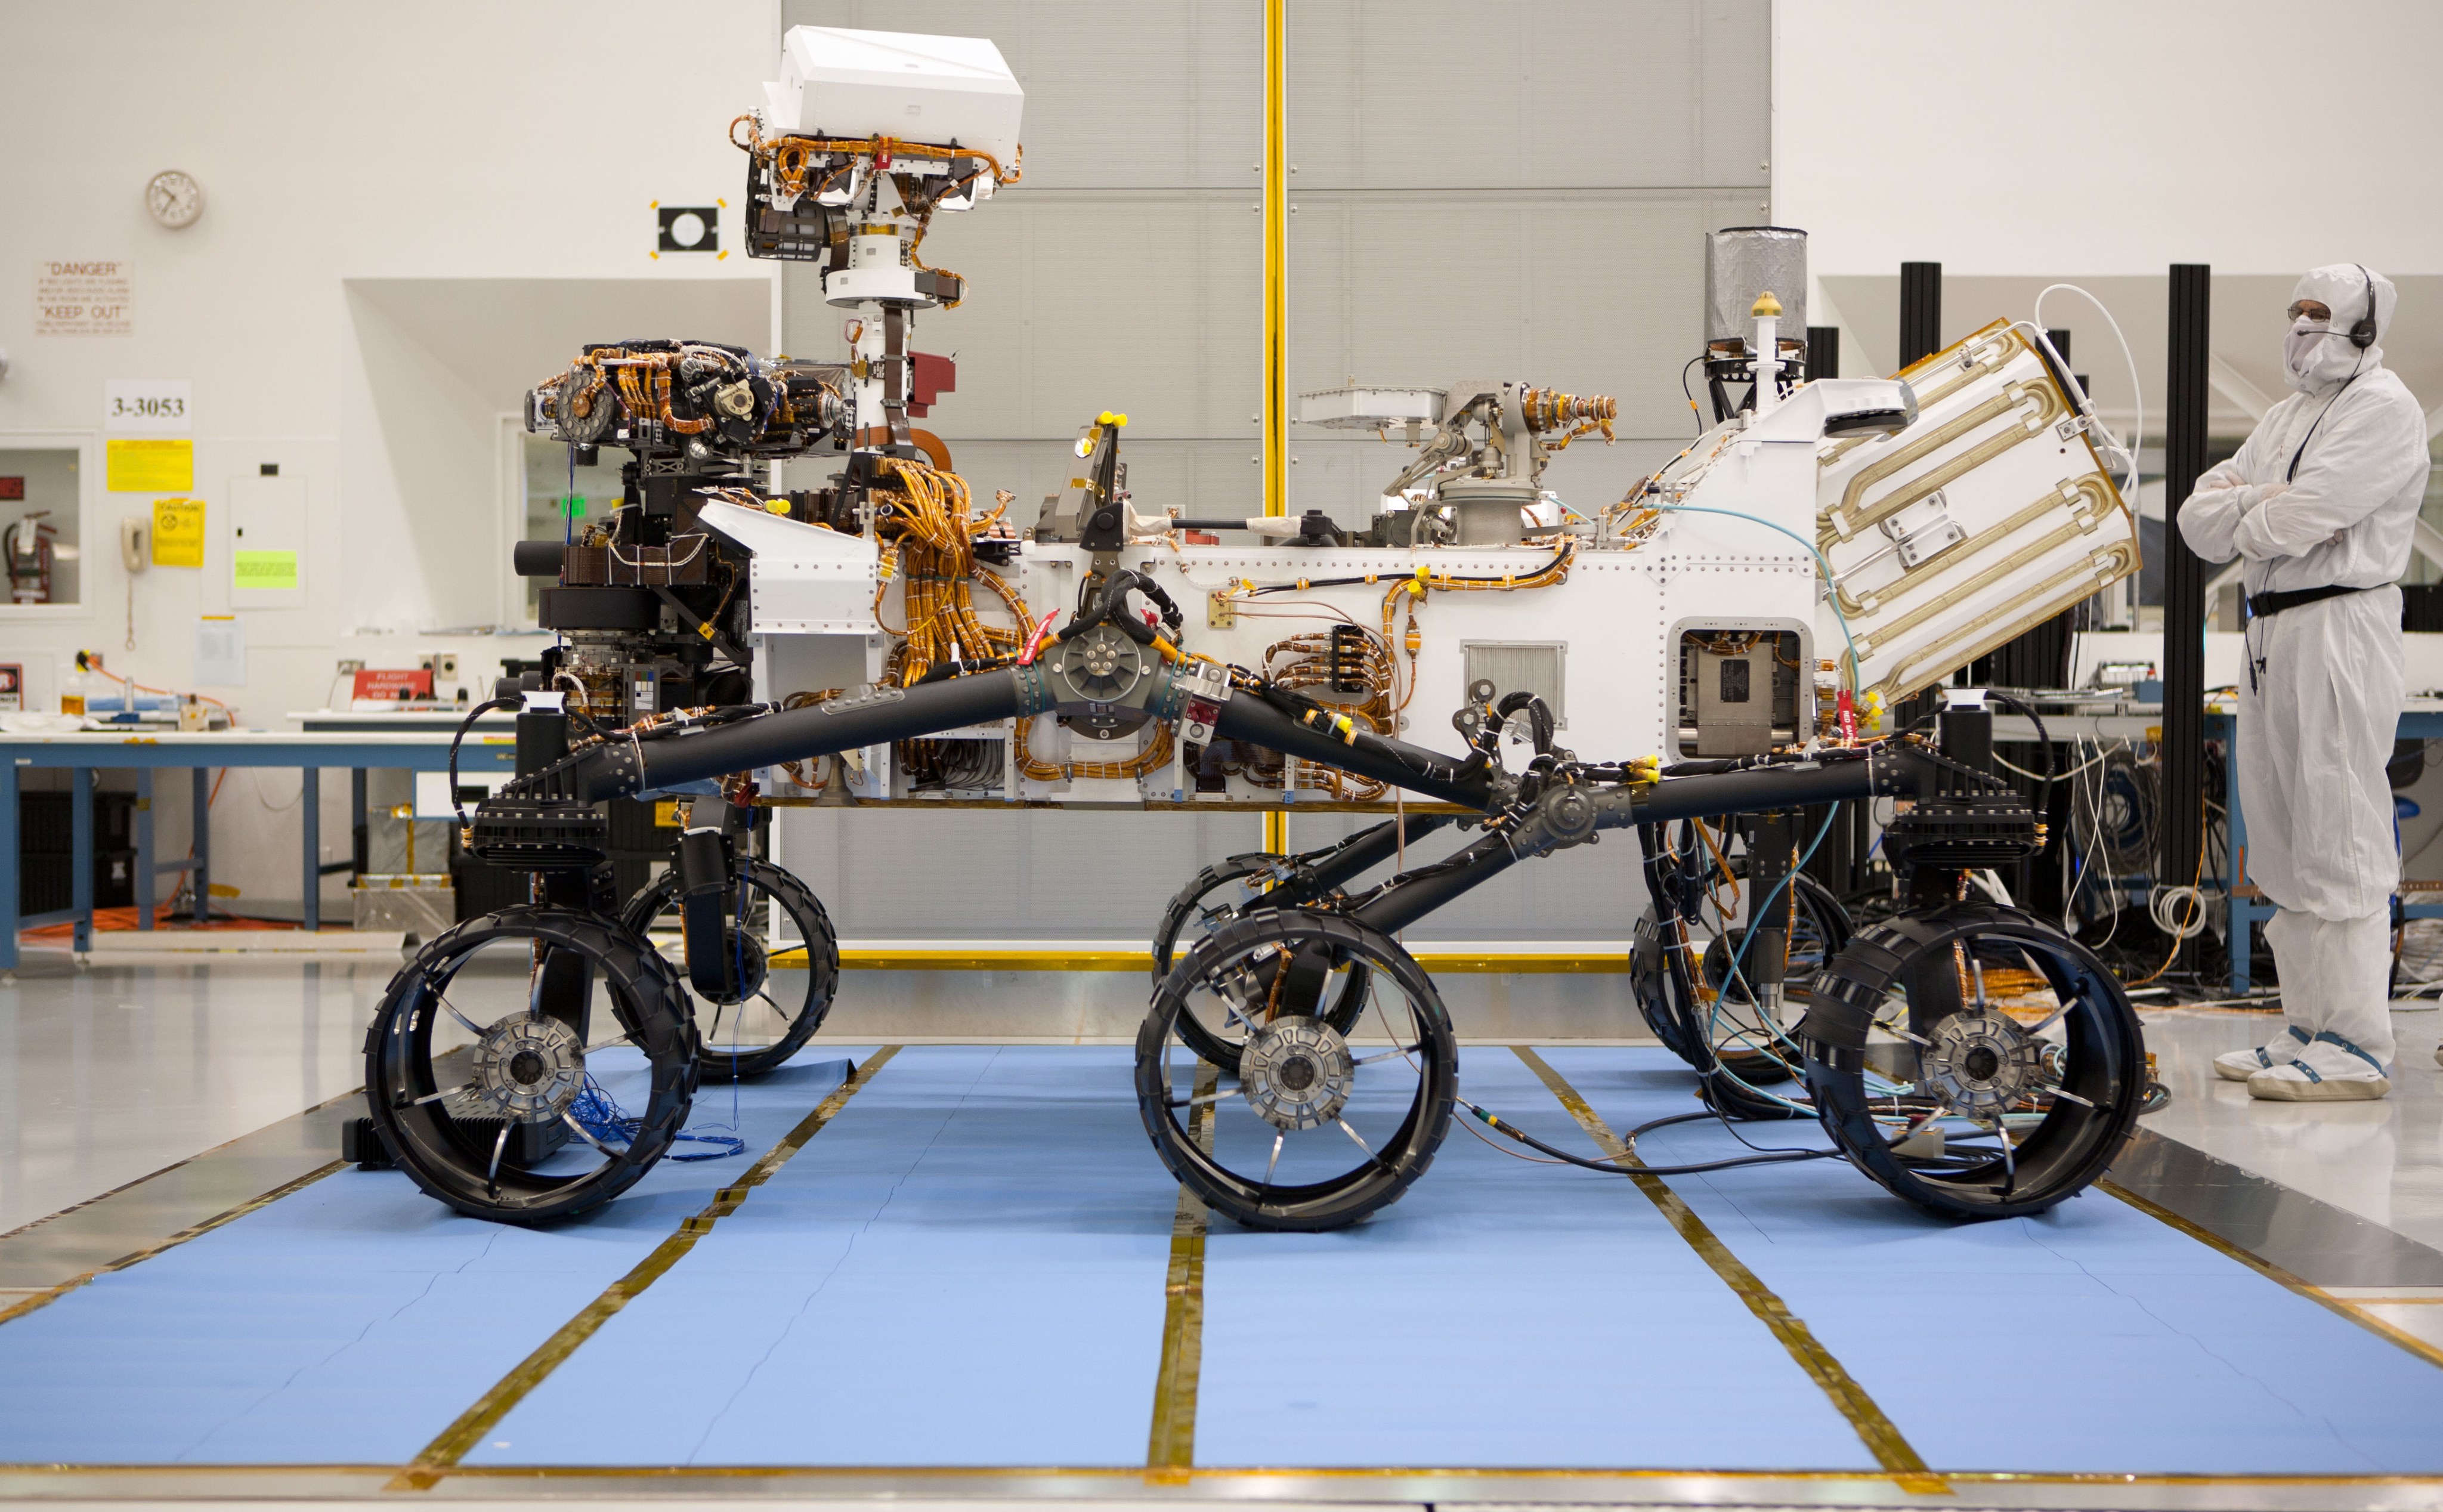 About the size of a small SUV, NASA's Curiosity rover is well equipped for a tour of Gale Crater on Mars.